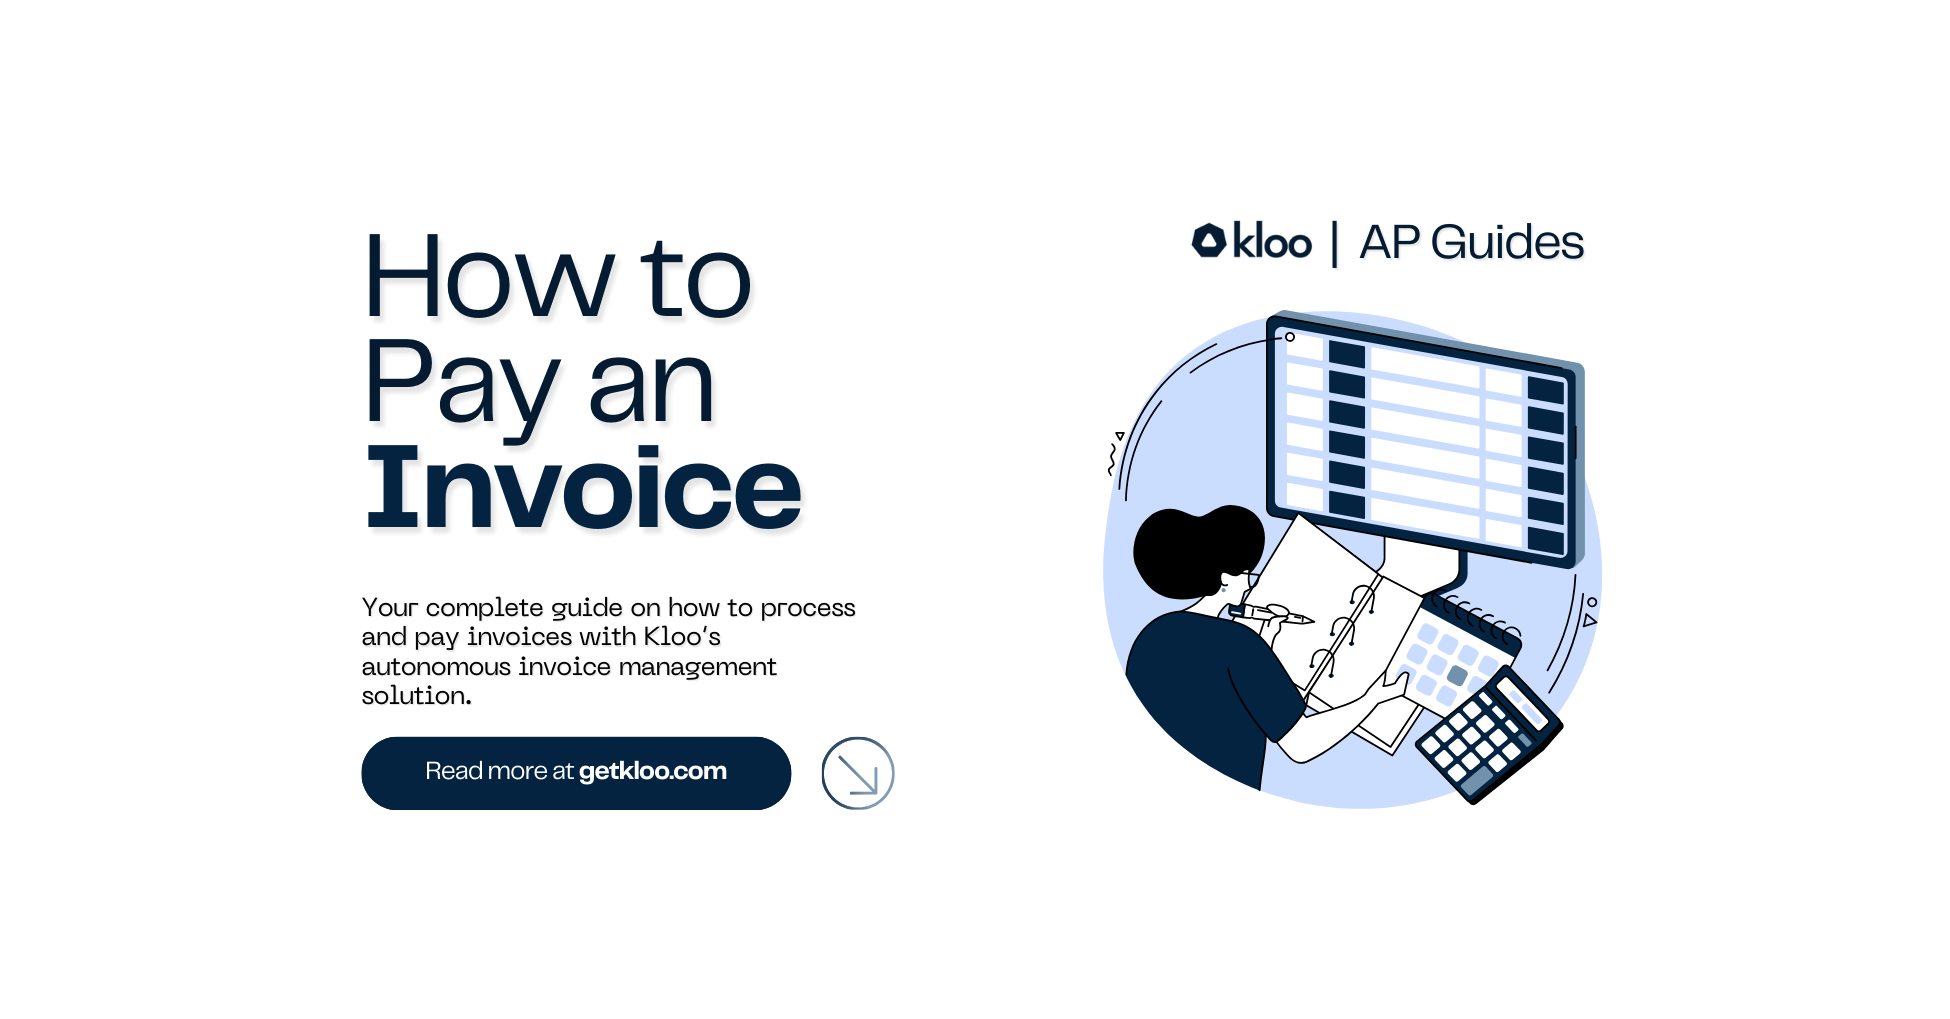 Everything You Need to Know about How to Pay Invoices